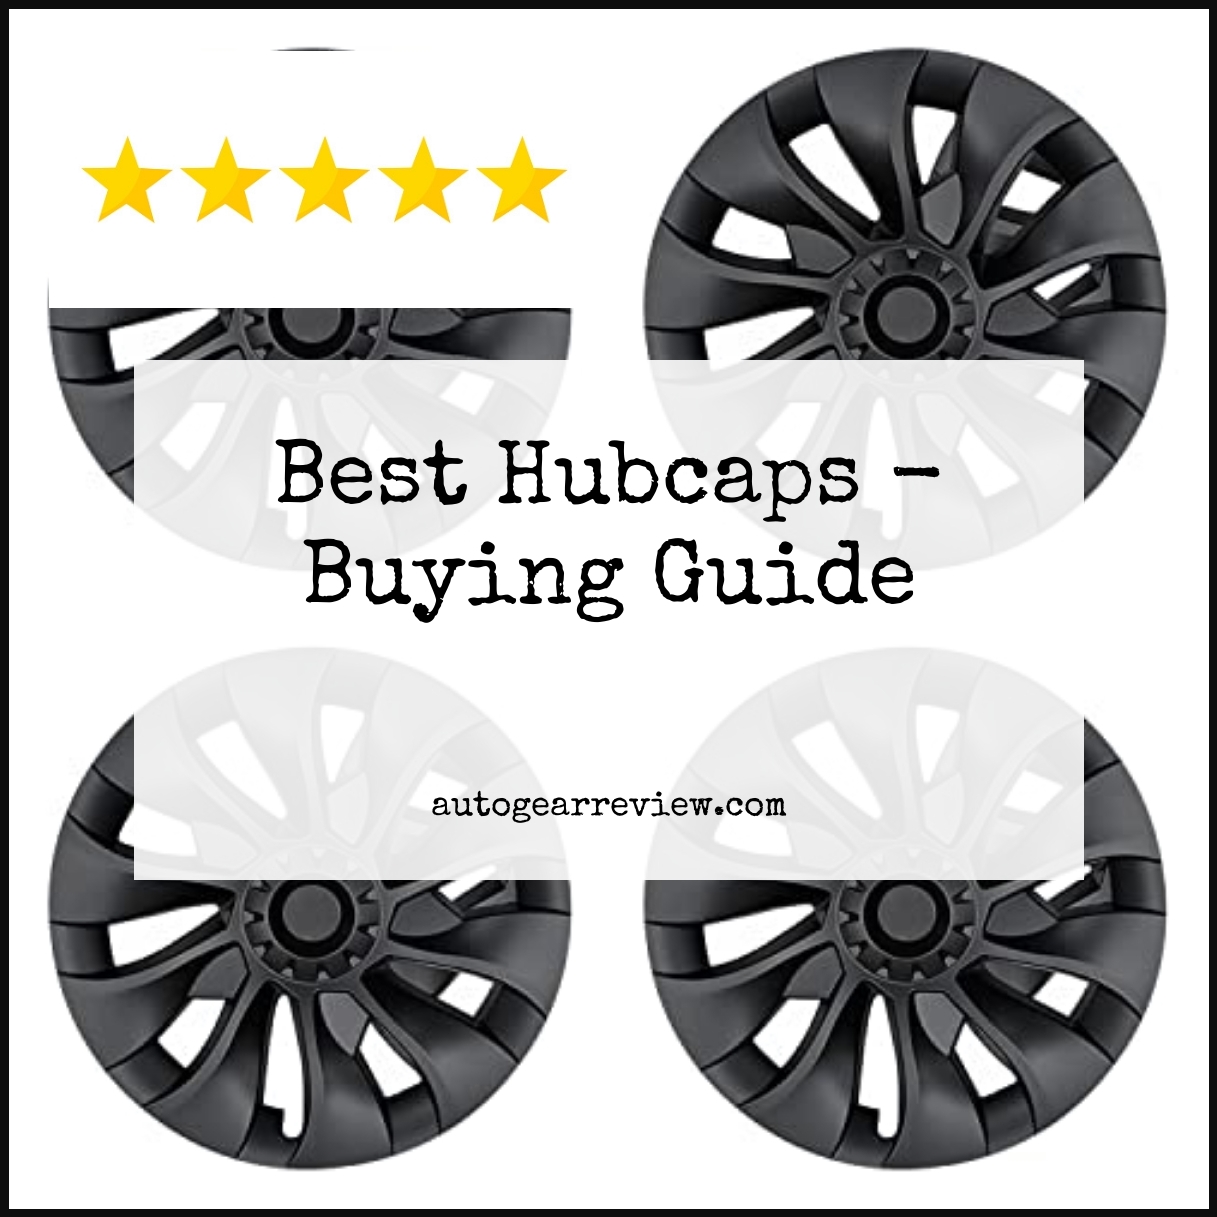 Best Hubcaps - Buying Guide